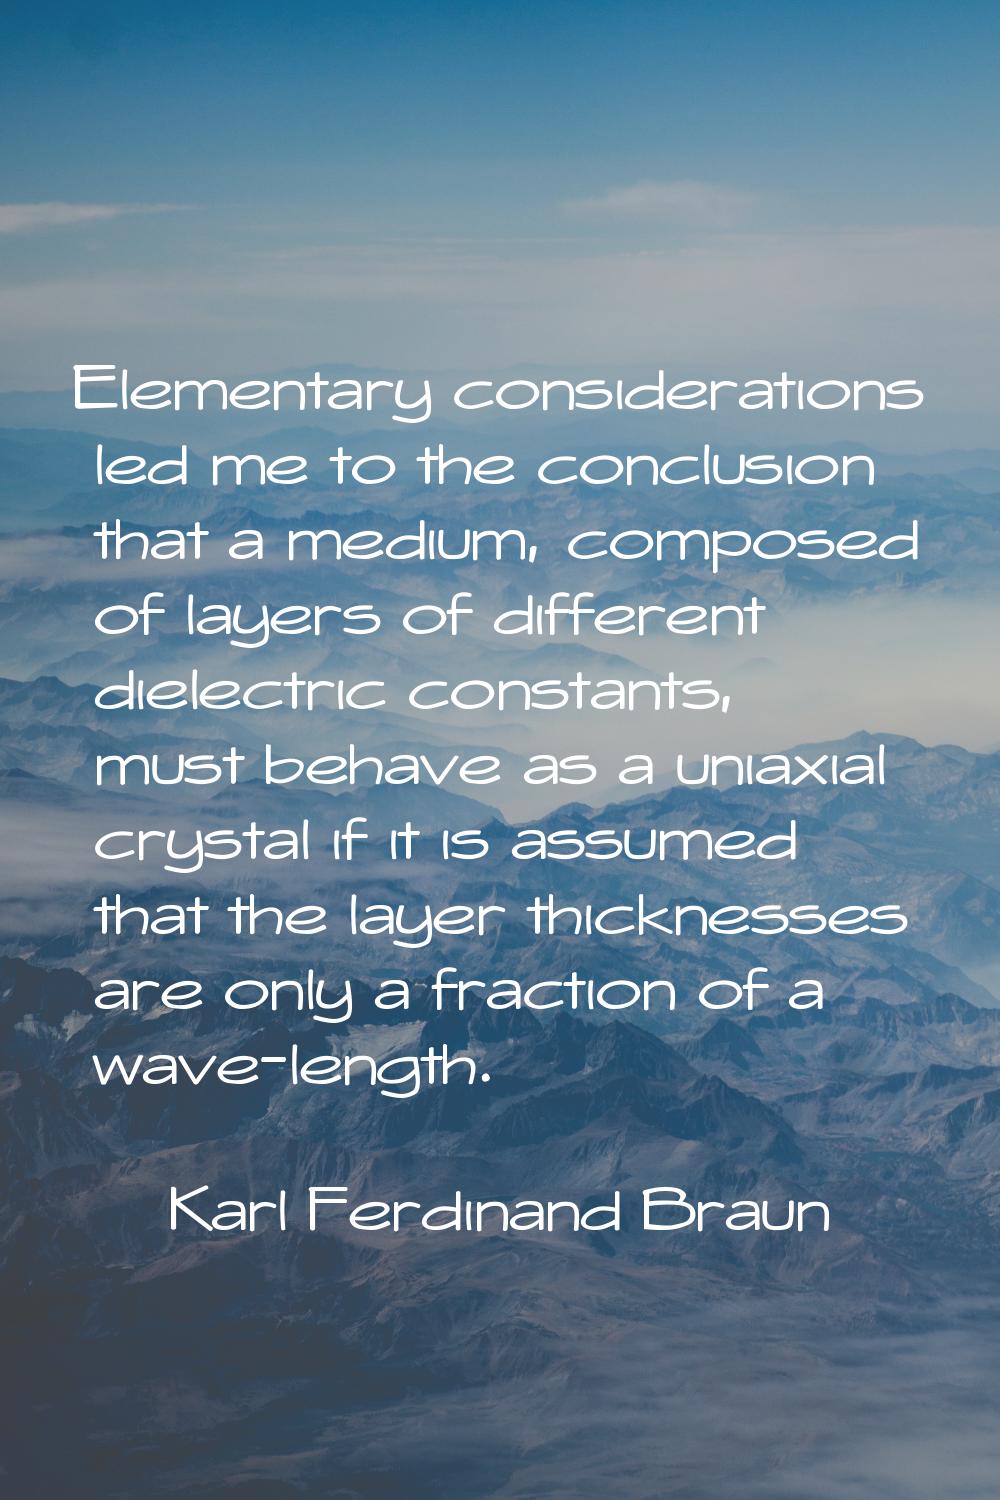 Elementary considerations led me to the conclusion that a medium, composed of layers of different d